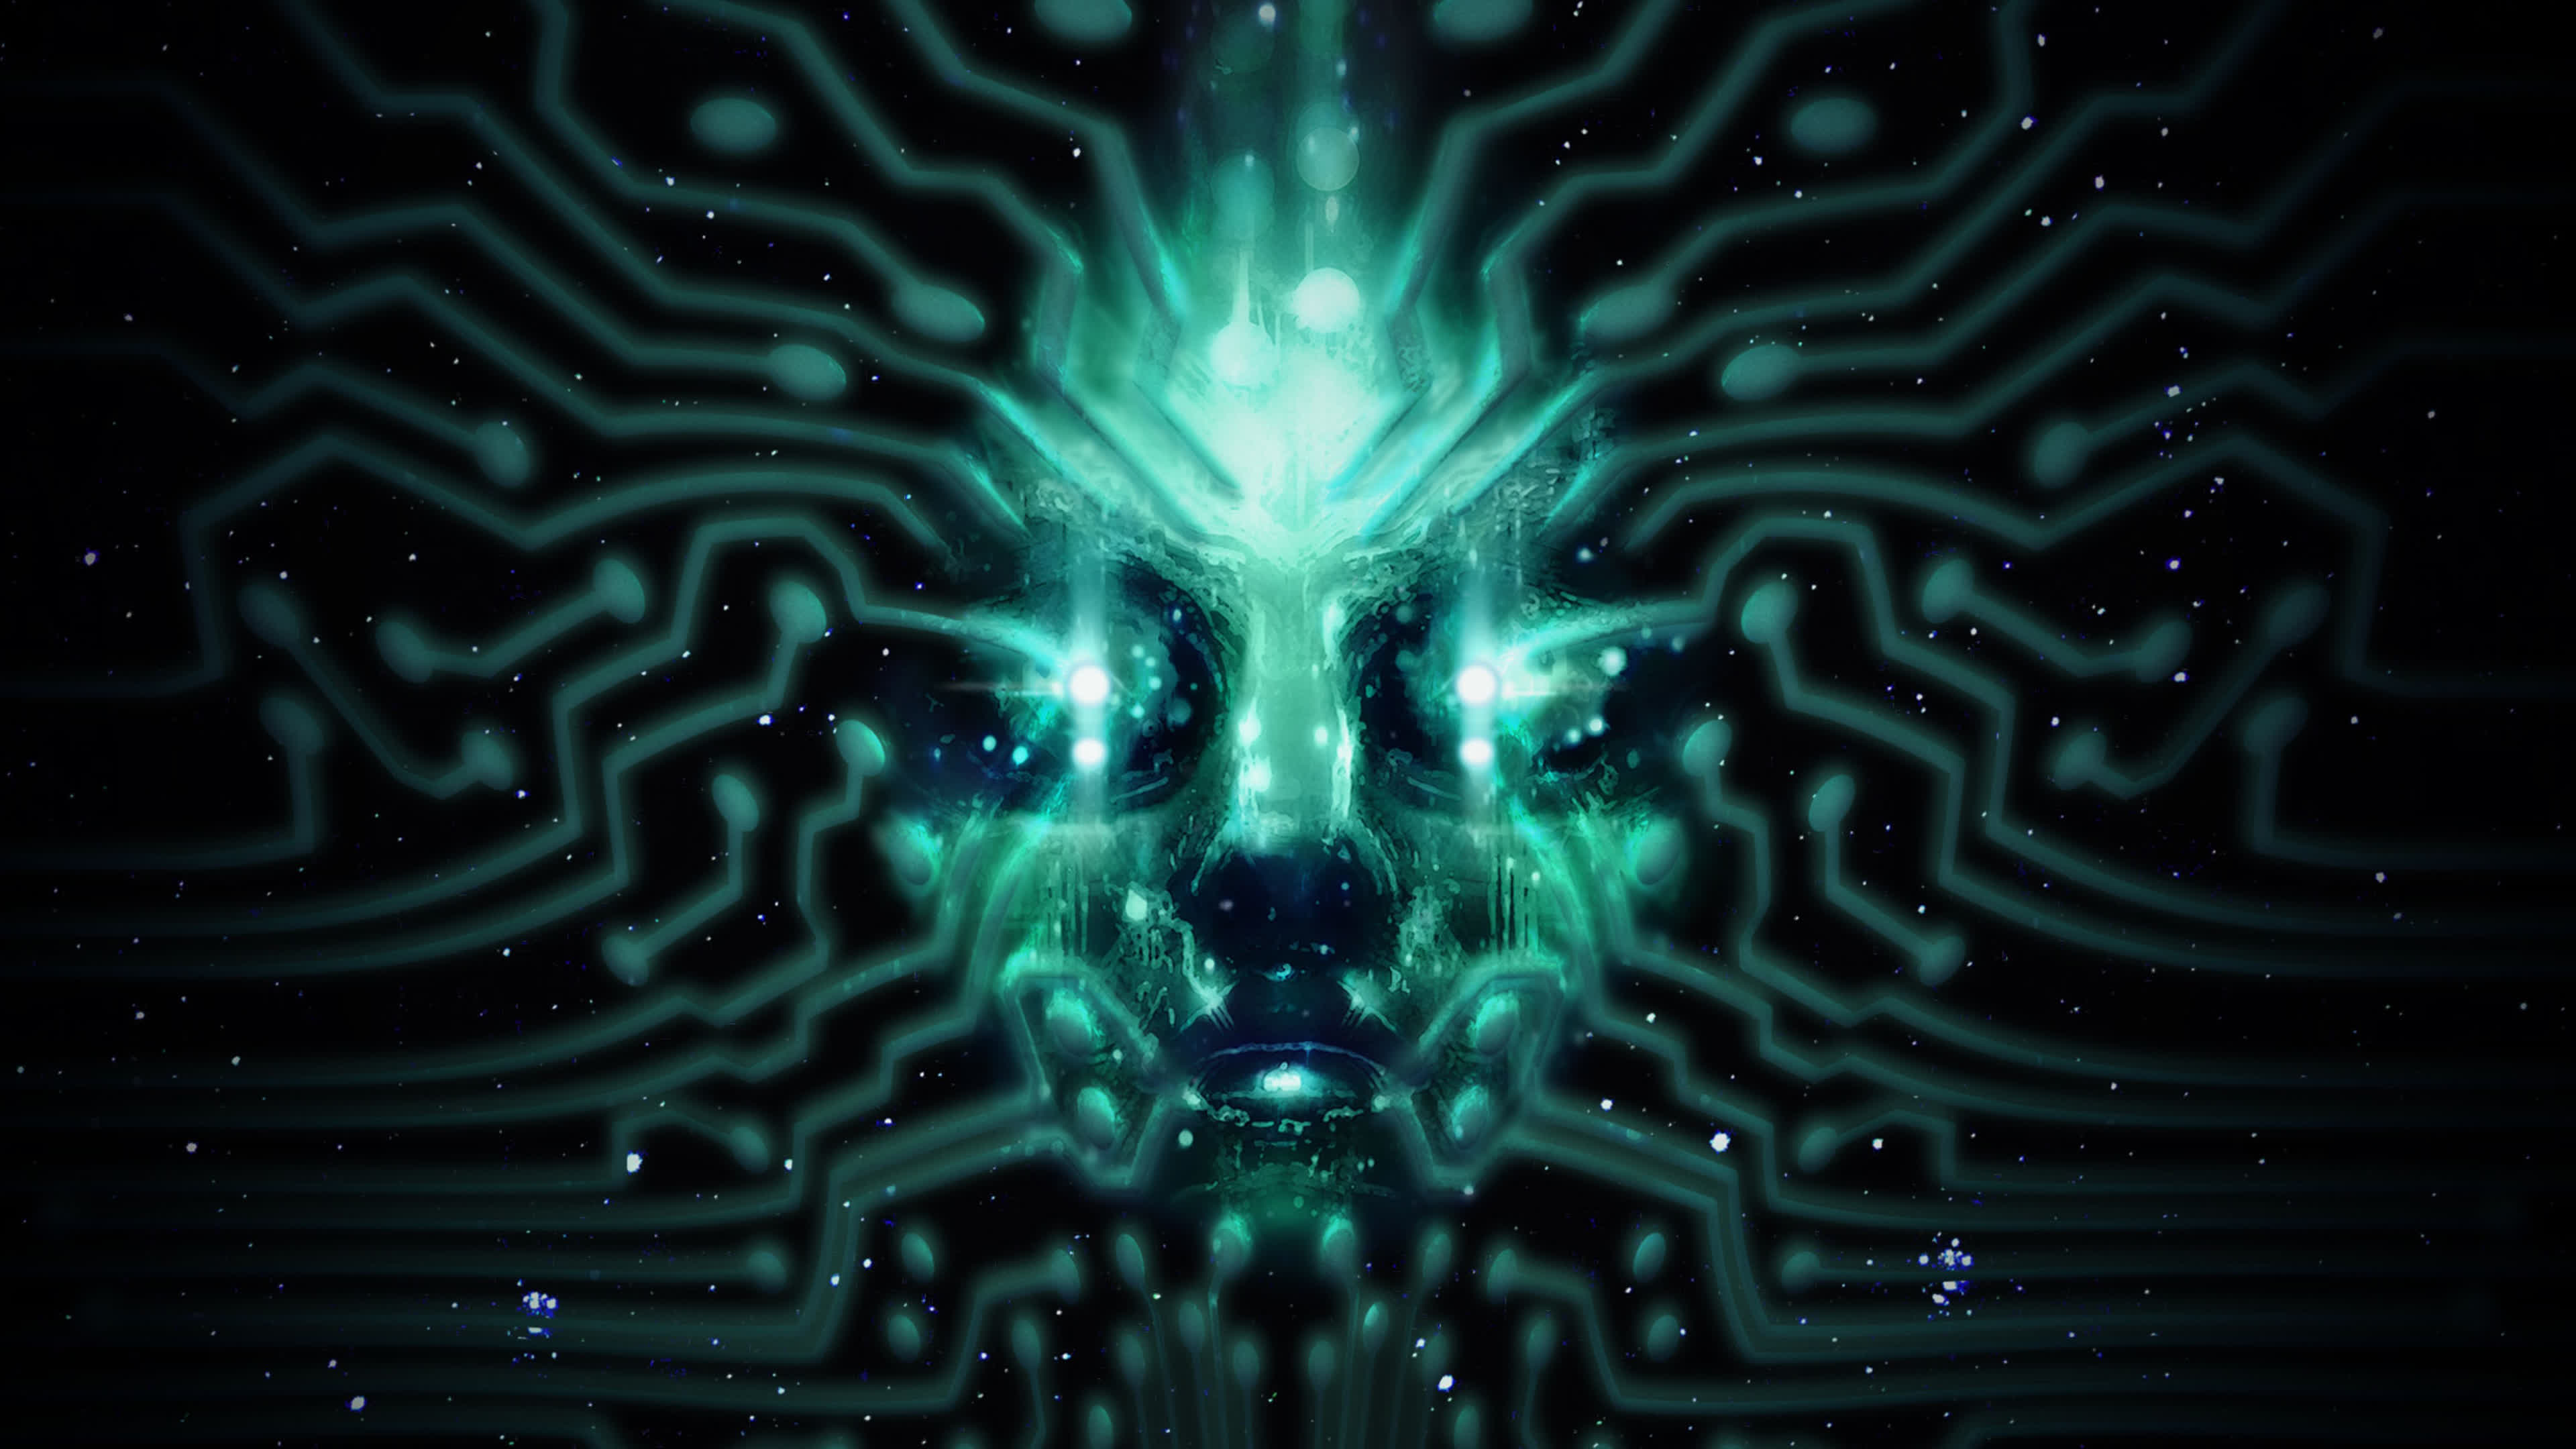 System Shock remake has gone gold and will launch on May 30